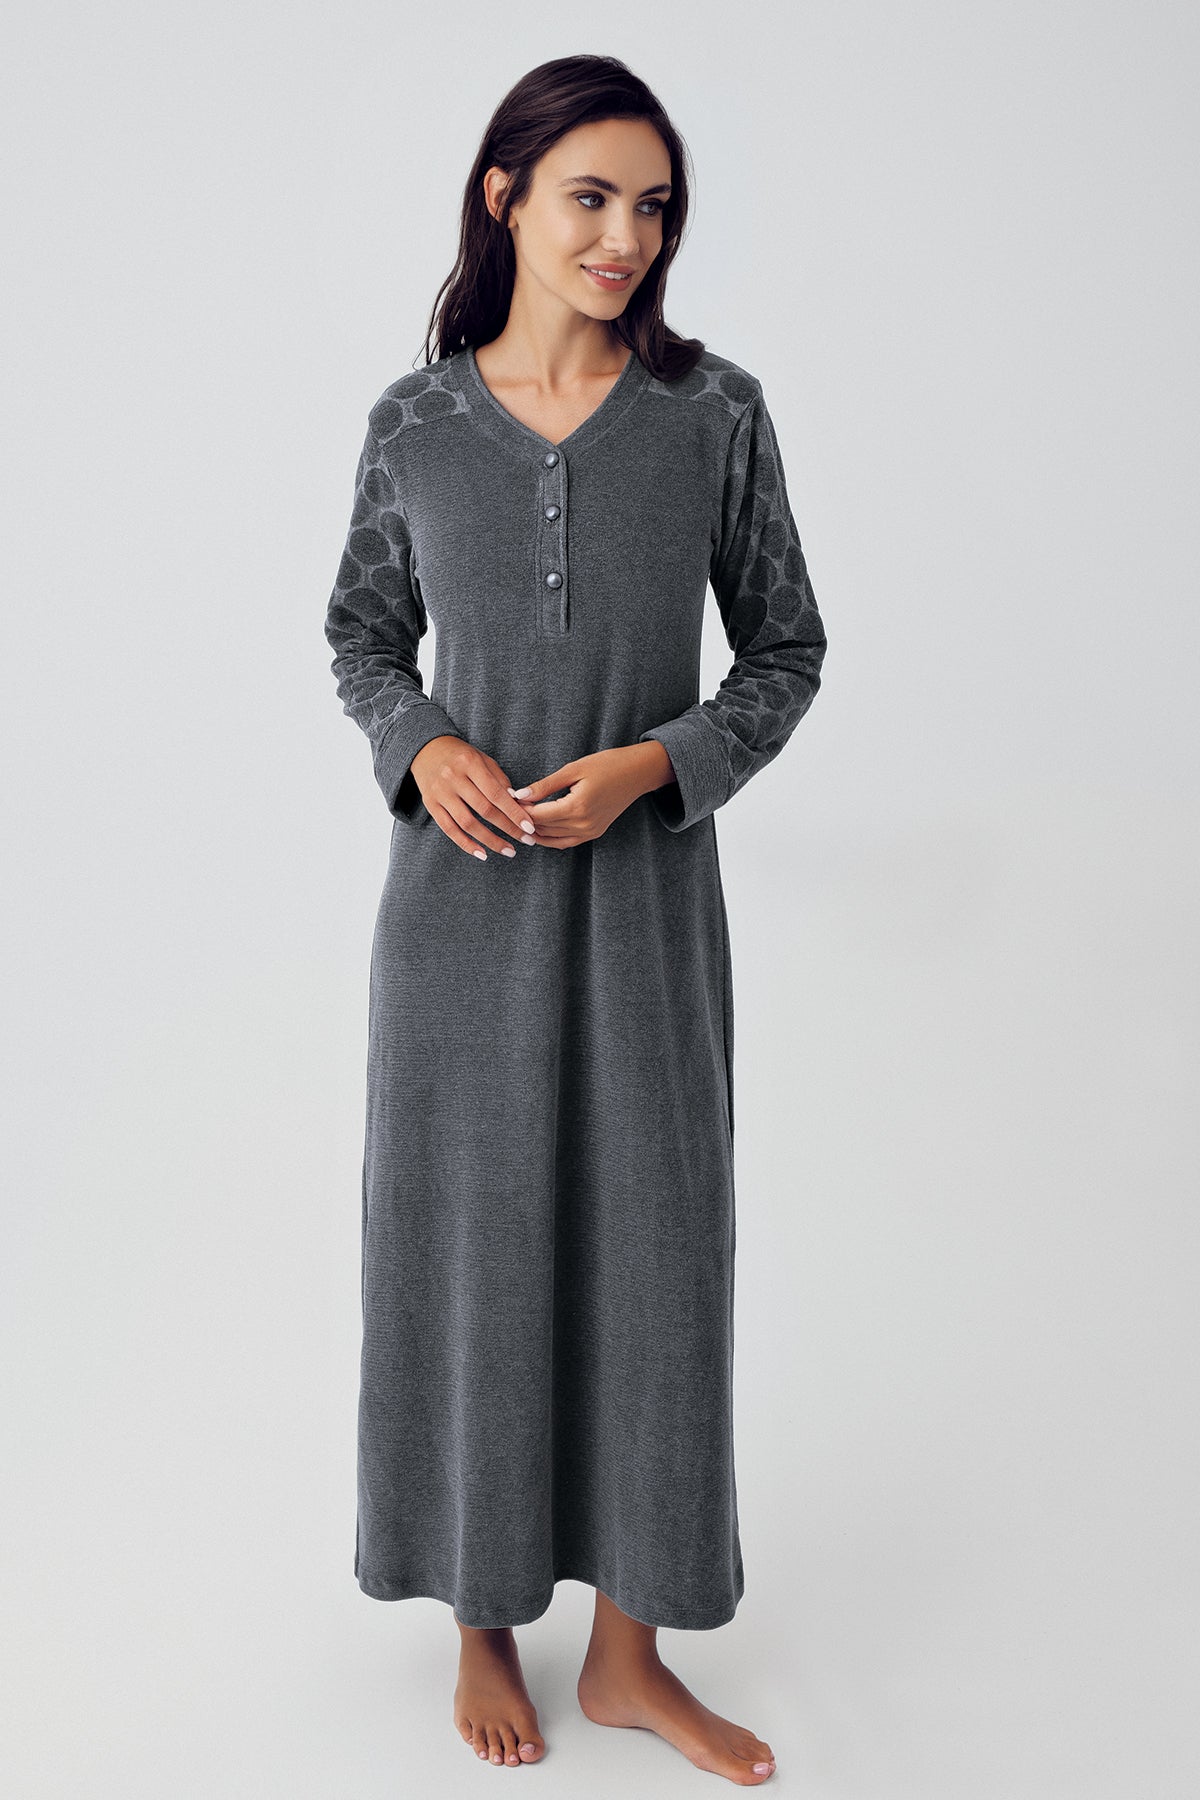 Terry Jacquard Maternity & Nursing Nightgown Anthracite - 15101